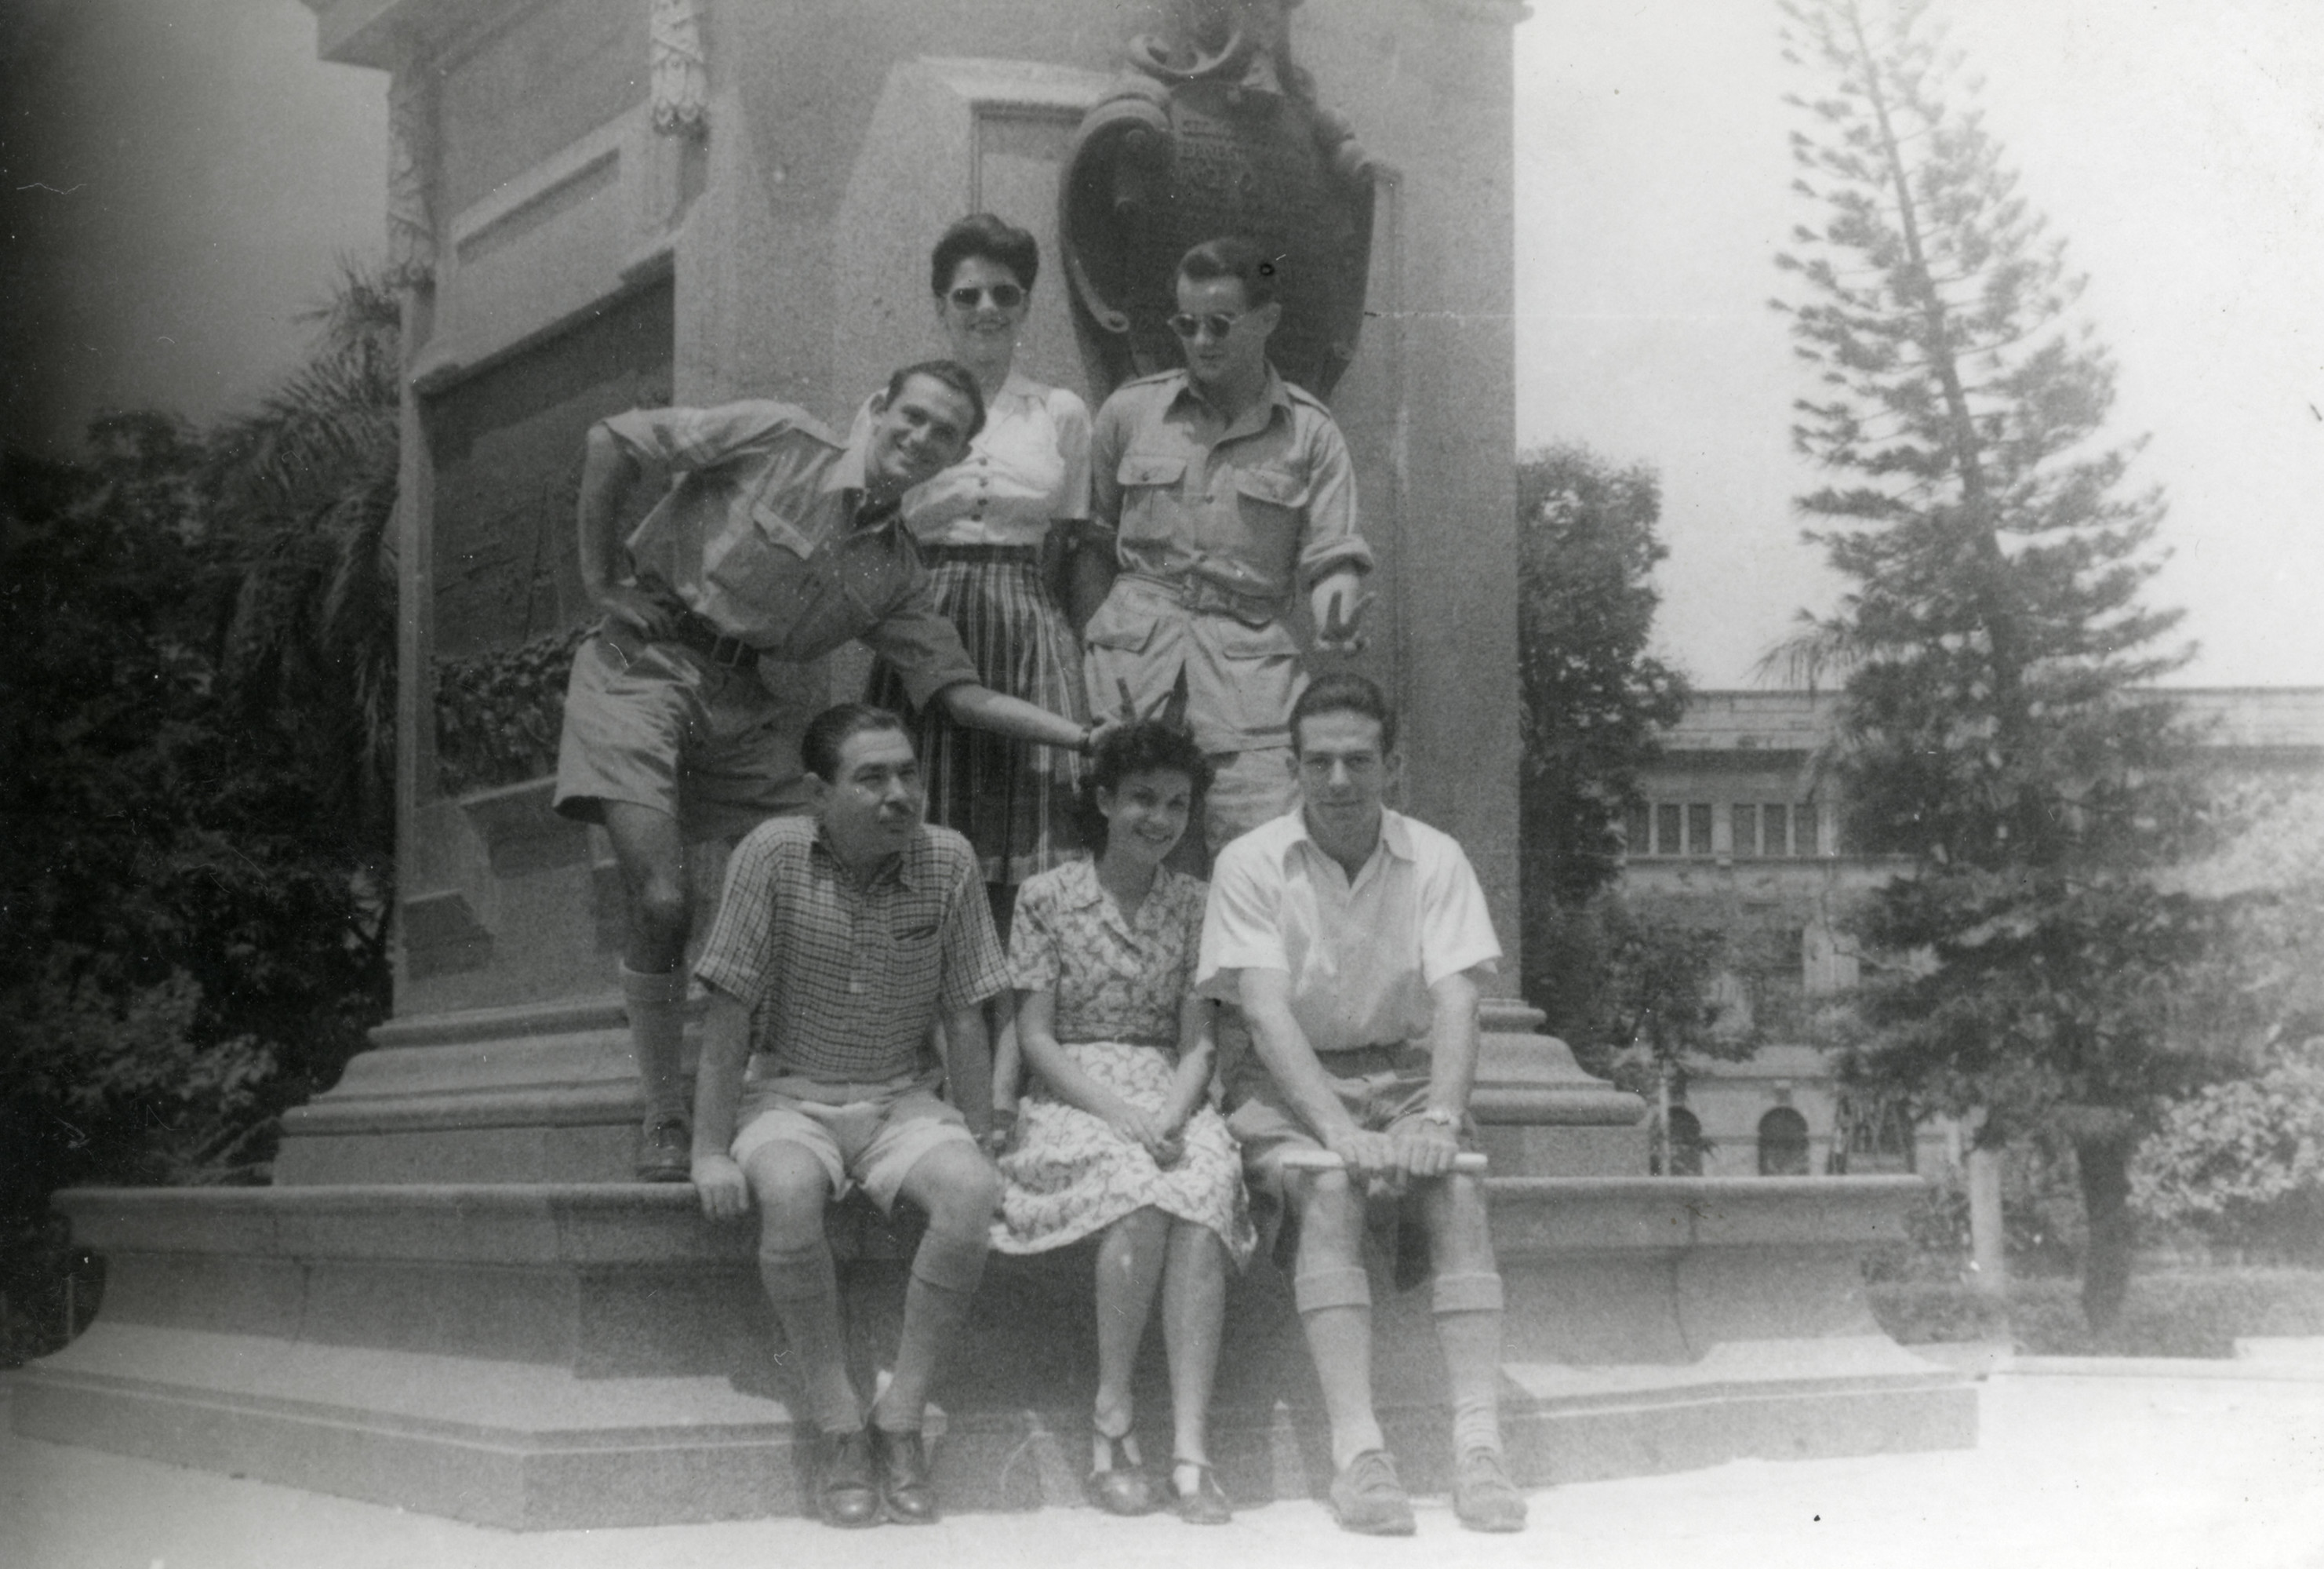 A group of friends pose in front of a monument in the garden of  the Prince of Wales Museum in Bombay, on V-E Day.

Among those pictured is George Klimt (seated in front, far right).